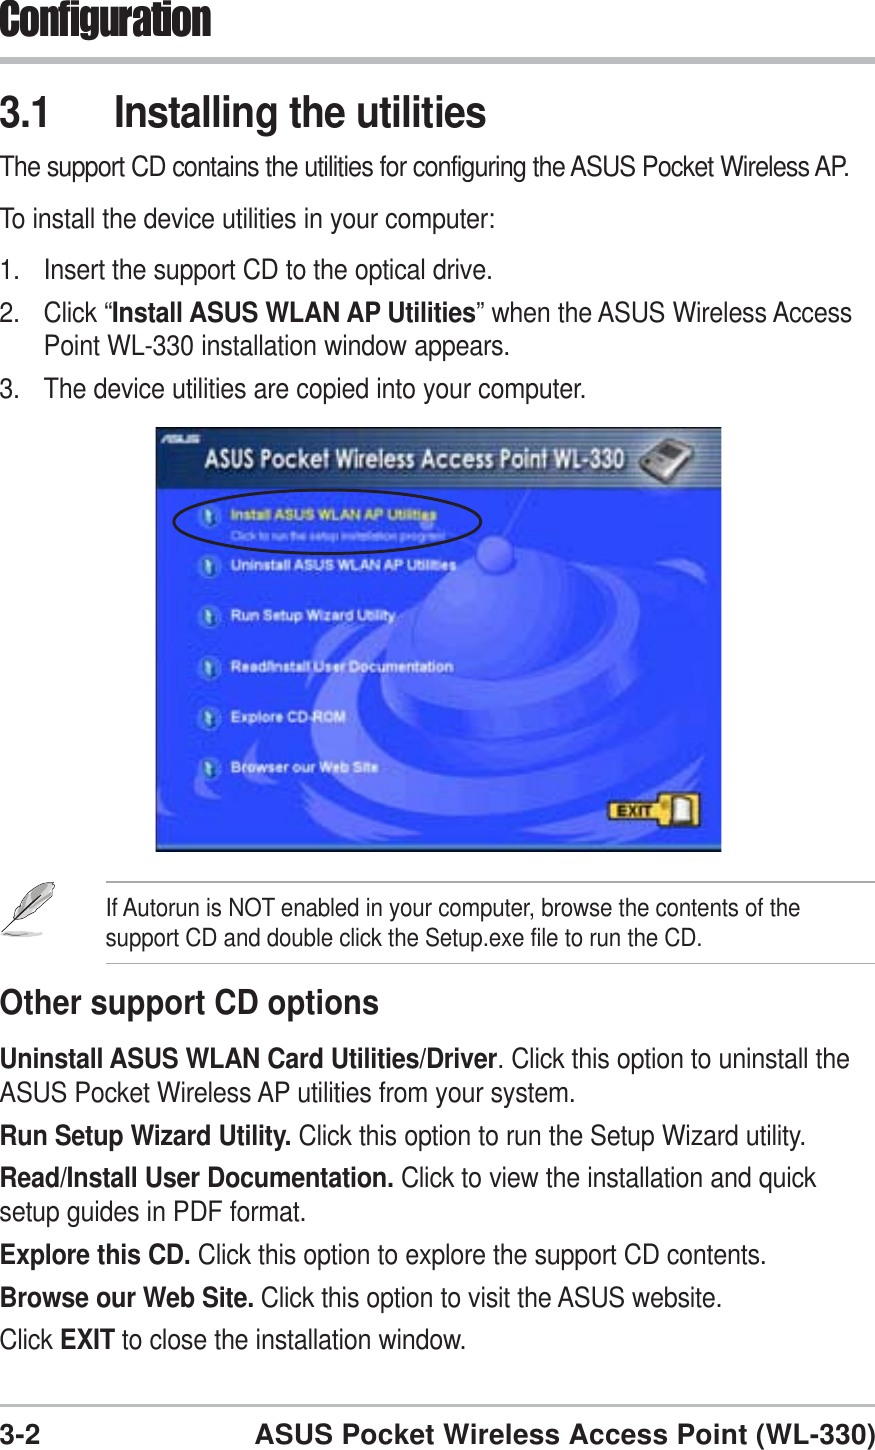 3-2 ASUS Pocket Wireless Access Point (WL-330)Configuration3.1 Installing the utilitiesThe support CD contains the utilities for configuring the ASUS Pocket Wireless AP.To install the device utilities in your computer:1. Insert the support CD to the optical drive.2. Click “Install ASUS WLAN AP Utilities” when the ASUS Wireless AccessPoint WL-330 installation window appears.3. The device utilities are copied into your computer.If Autorun is NOT enabled in your computer, browse the contents of thesupport CD and double click the Setup.exe file to run the CD.Other support CD optionsUninstall ASUS WLAN Card Utilities/Driver. Click this option to uninstall theASUS Pocket Wireless AP utilities from your system.Run Setup Wizard Utility. Click this option to run the Setup Wizard utility.Read/Install User Documentation. Click to view the installation and quicksetup guides in PDF format.Explore this CD. Click this option to explore the support CD contents.Browse our Web Site. Click this option to visit the ASUS website.Click EXIT to close the installation window.